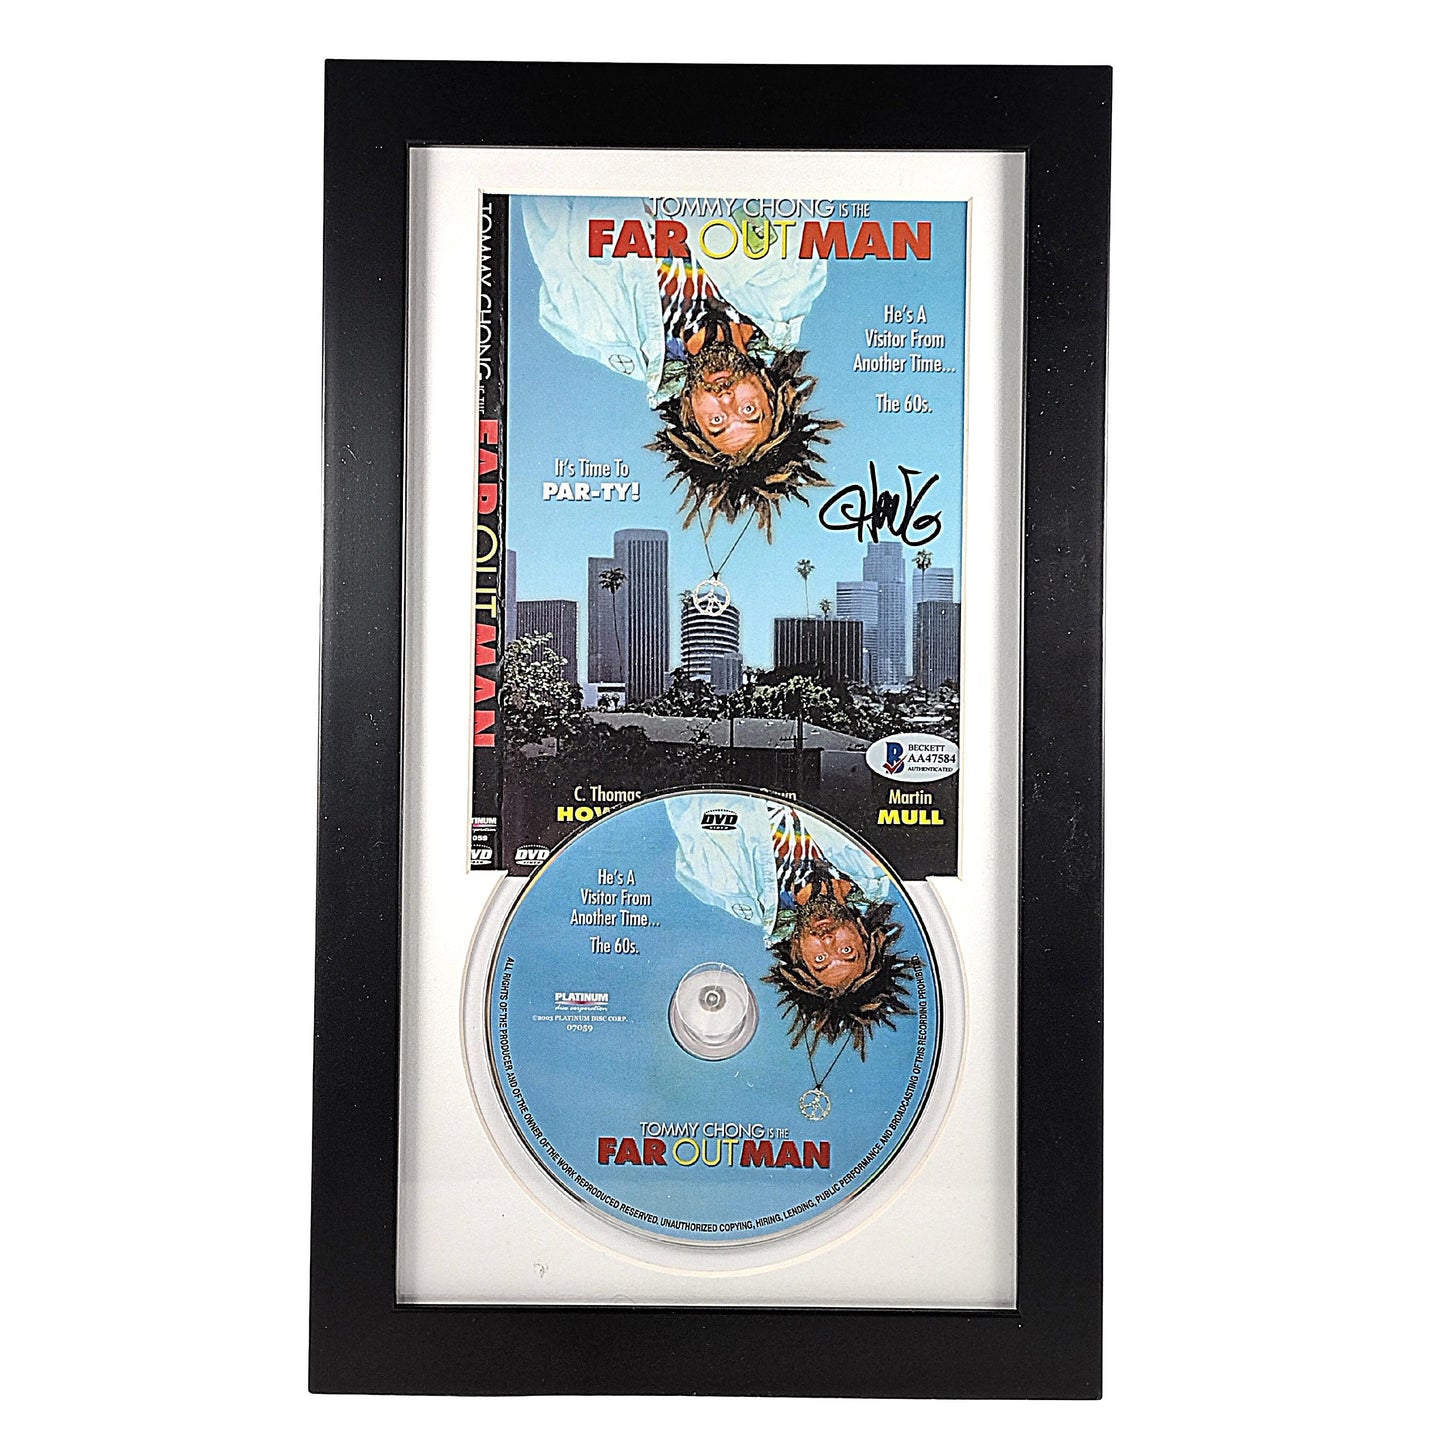 Hollywood- Autographed- Tommy Chong Signed Far Out Man DVD Cover Framed Matted Display Beckett Certified Authentic 102